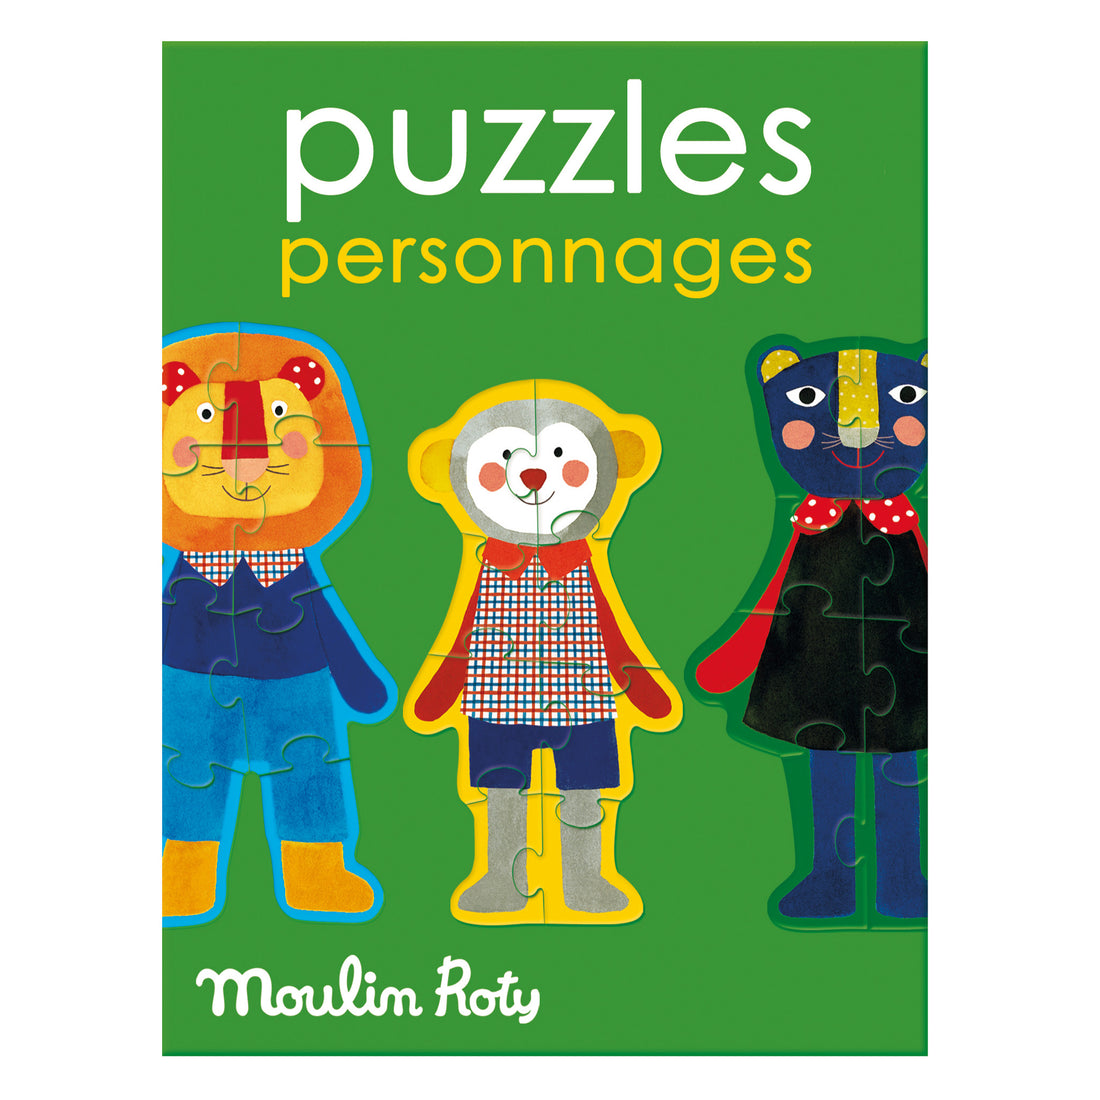 moulin-roty-puzzle-pop-characters-play-puzzle-kid-moul-661302-02